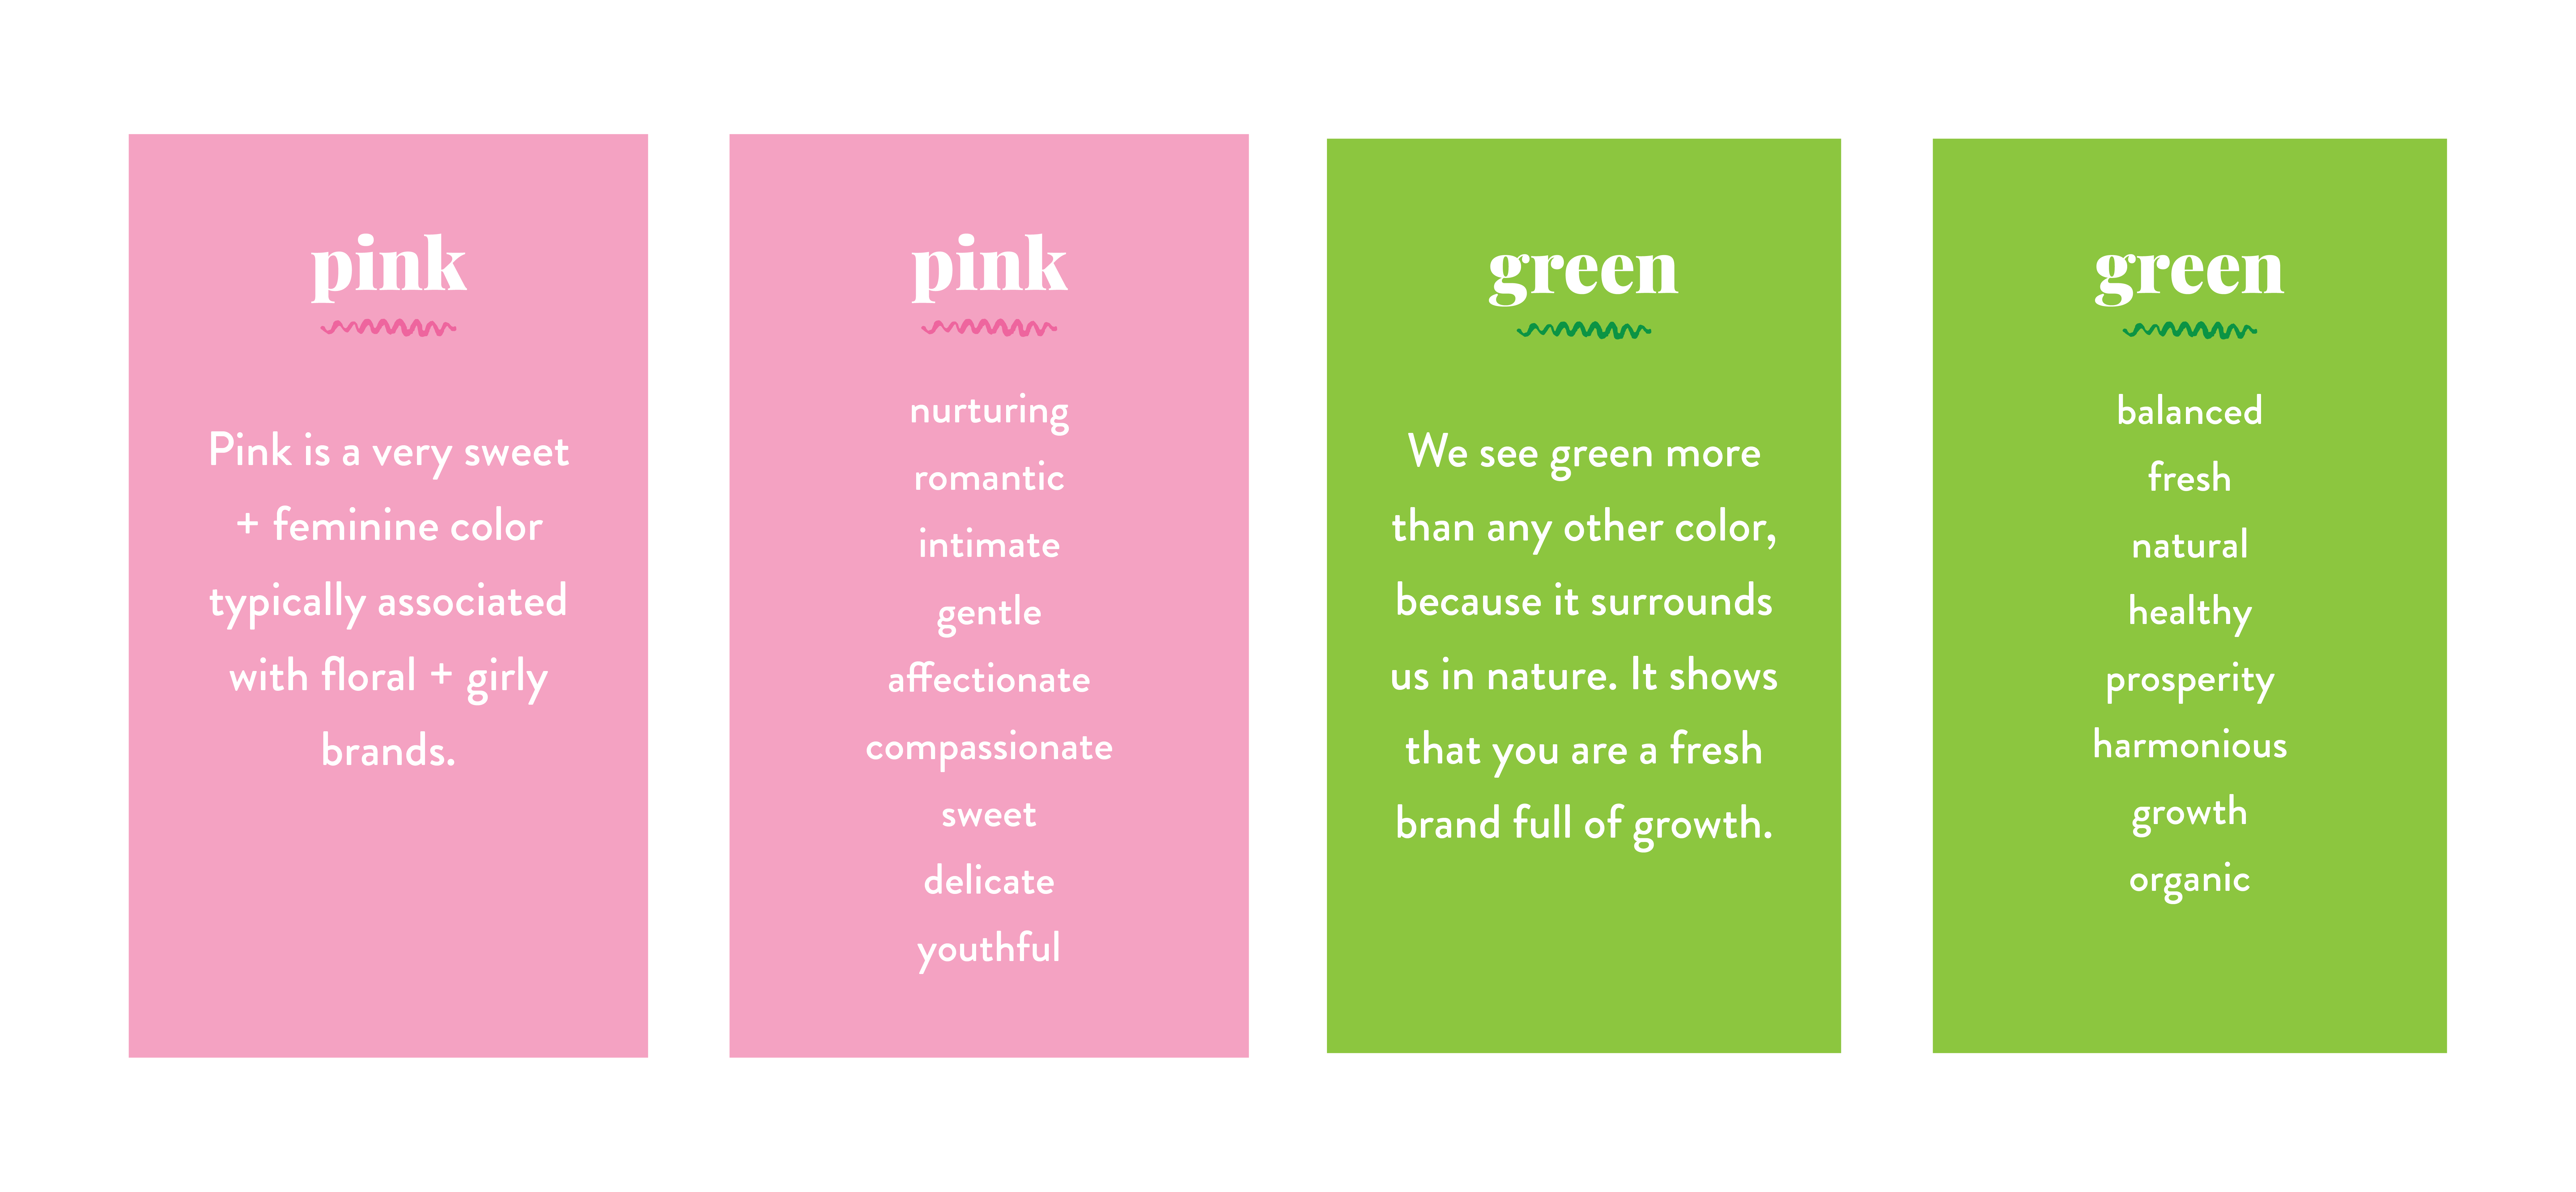 Psychology behind pink and green